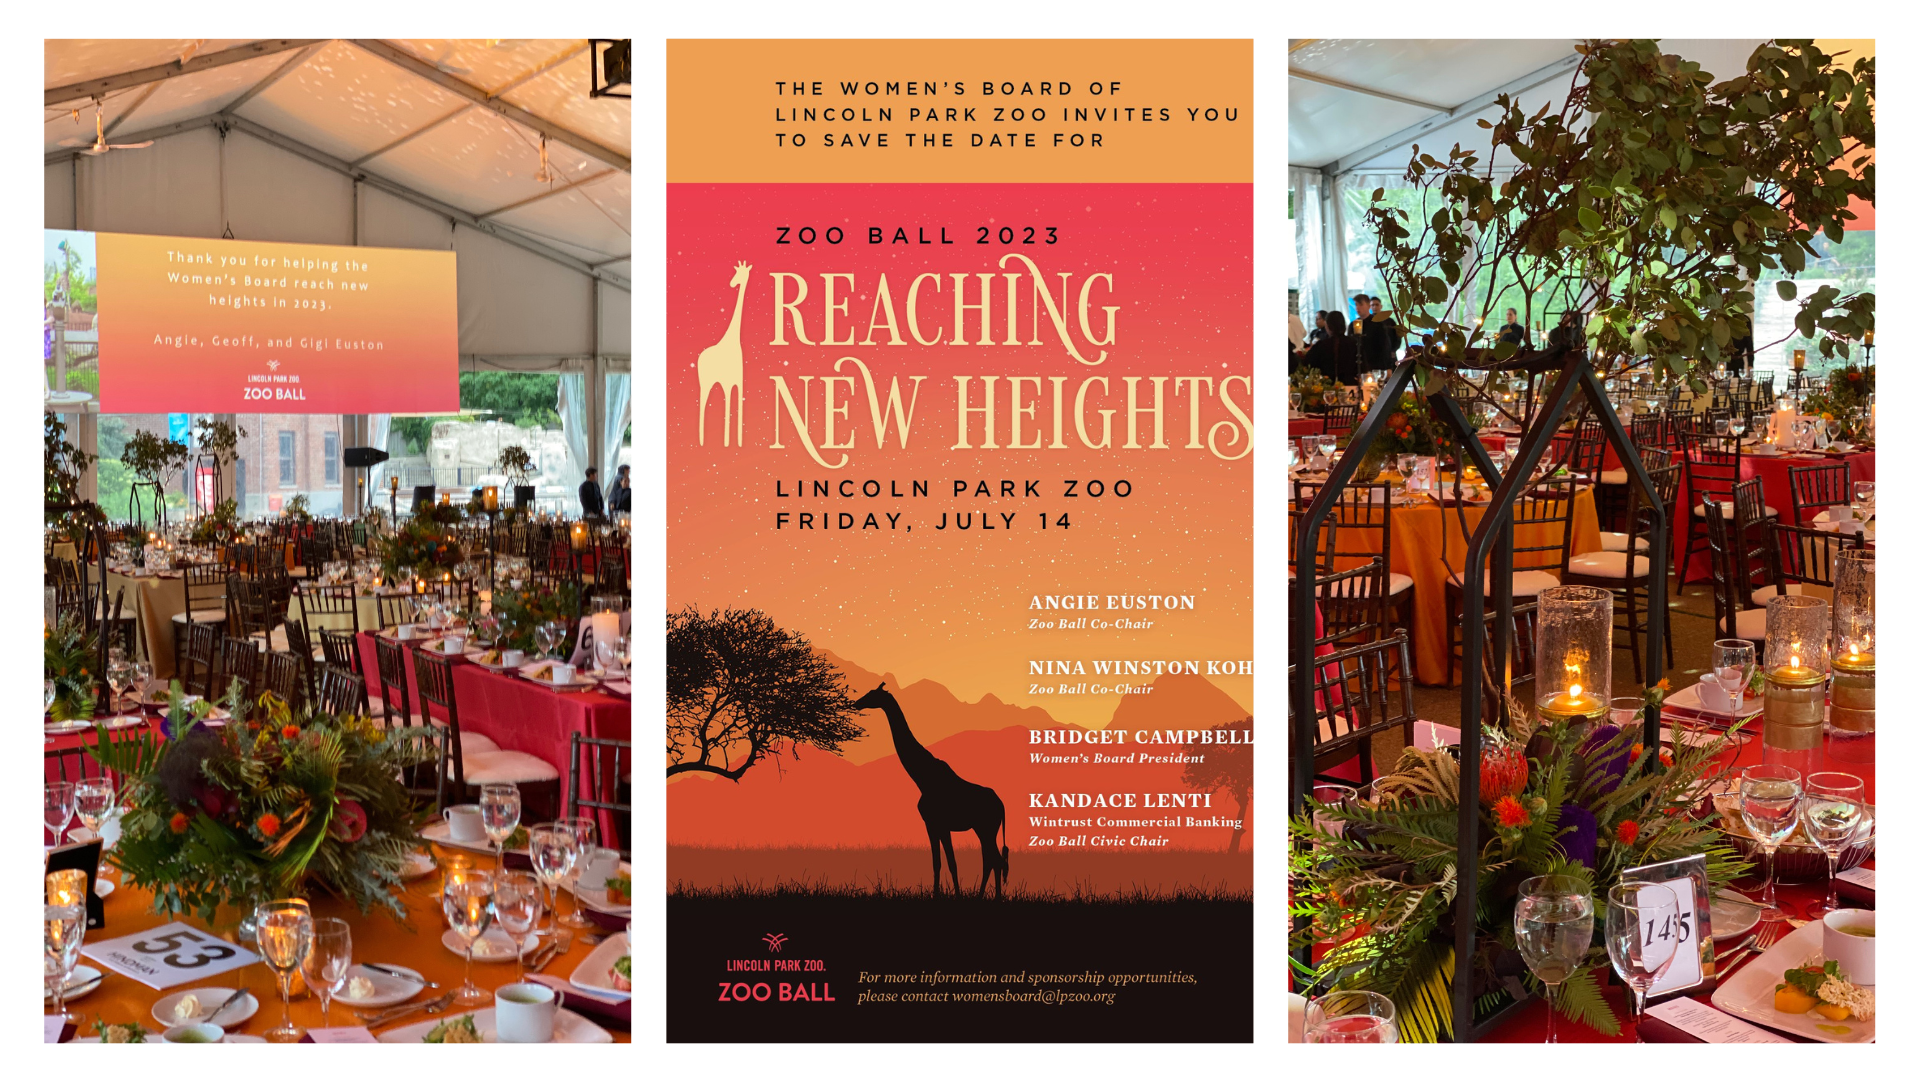 “Reaching New Heights” at the Lincoln Park Zoo’s Annual Women’s Board Gala